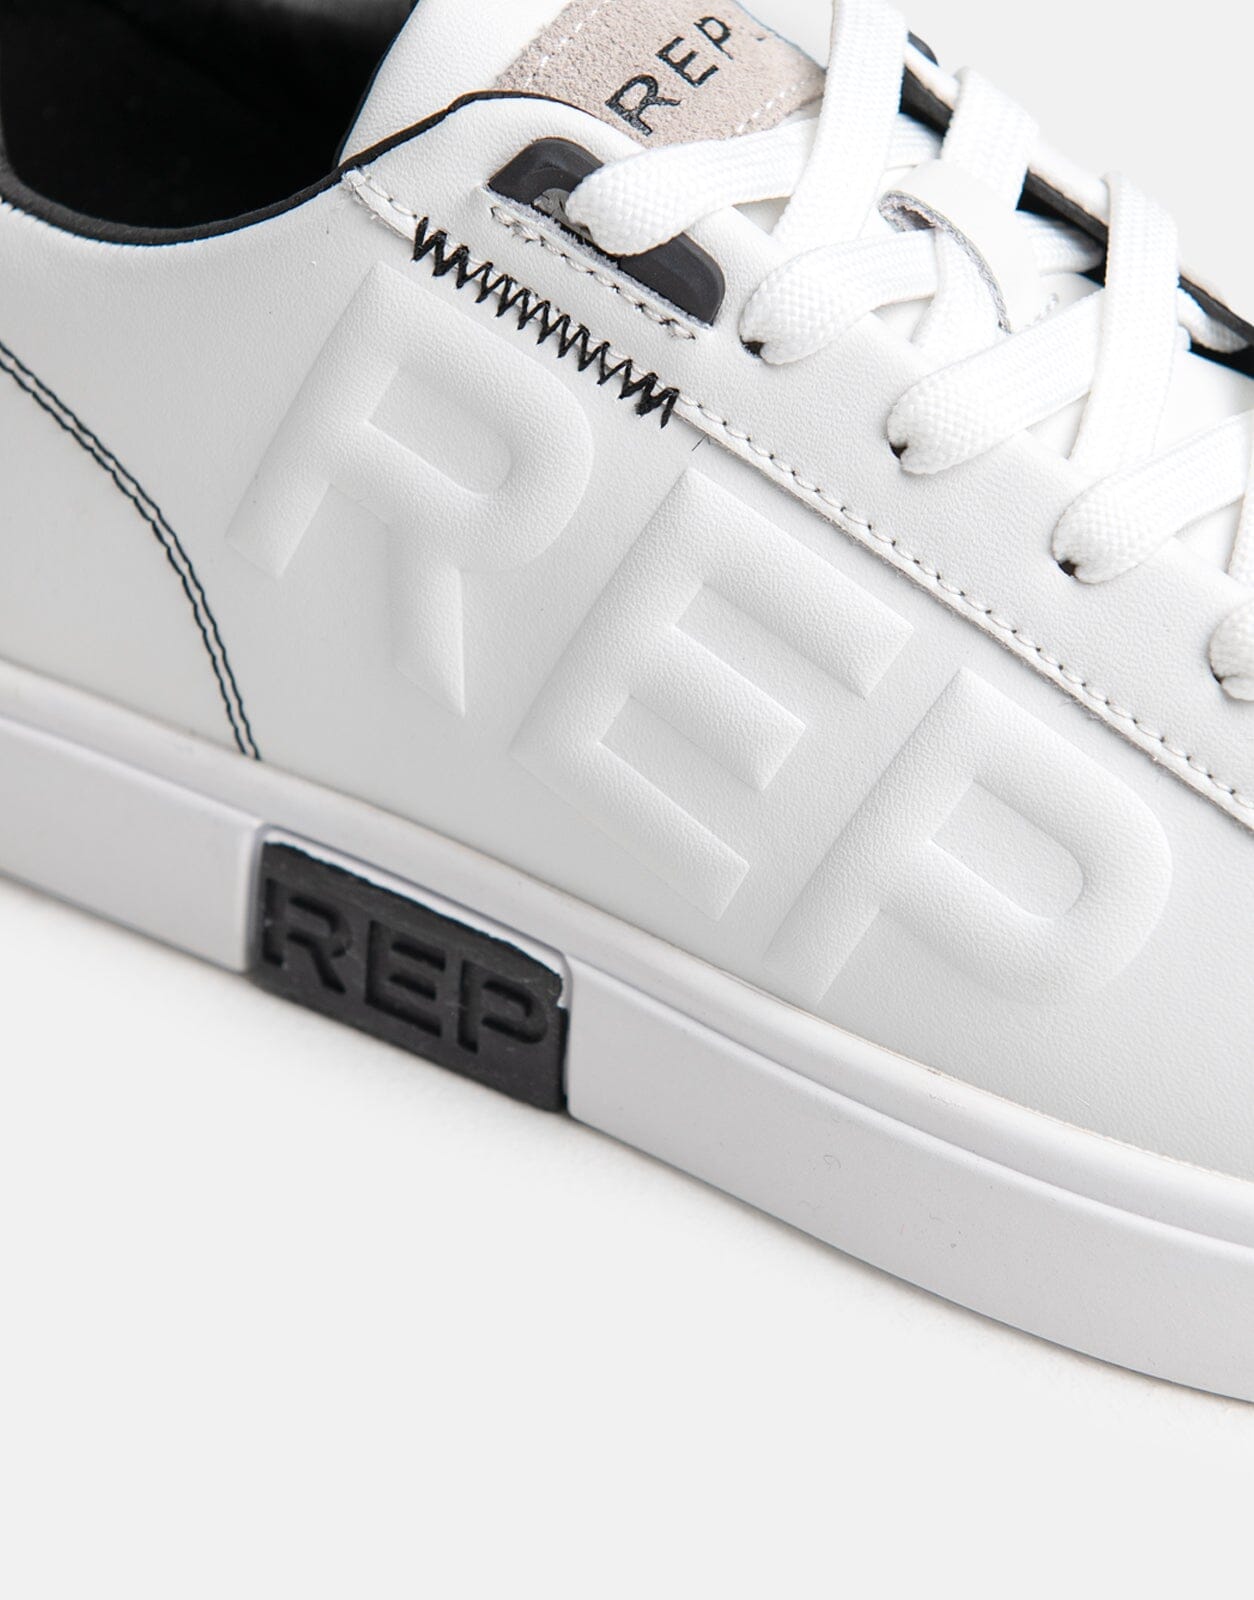 Replay Polys Up White Sneakers - Subwear